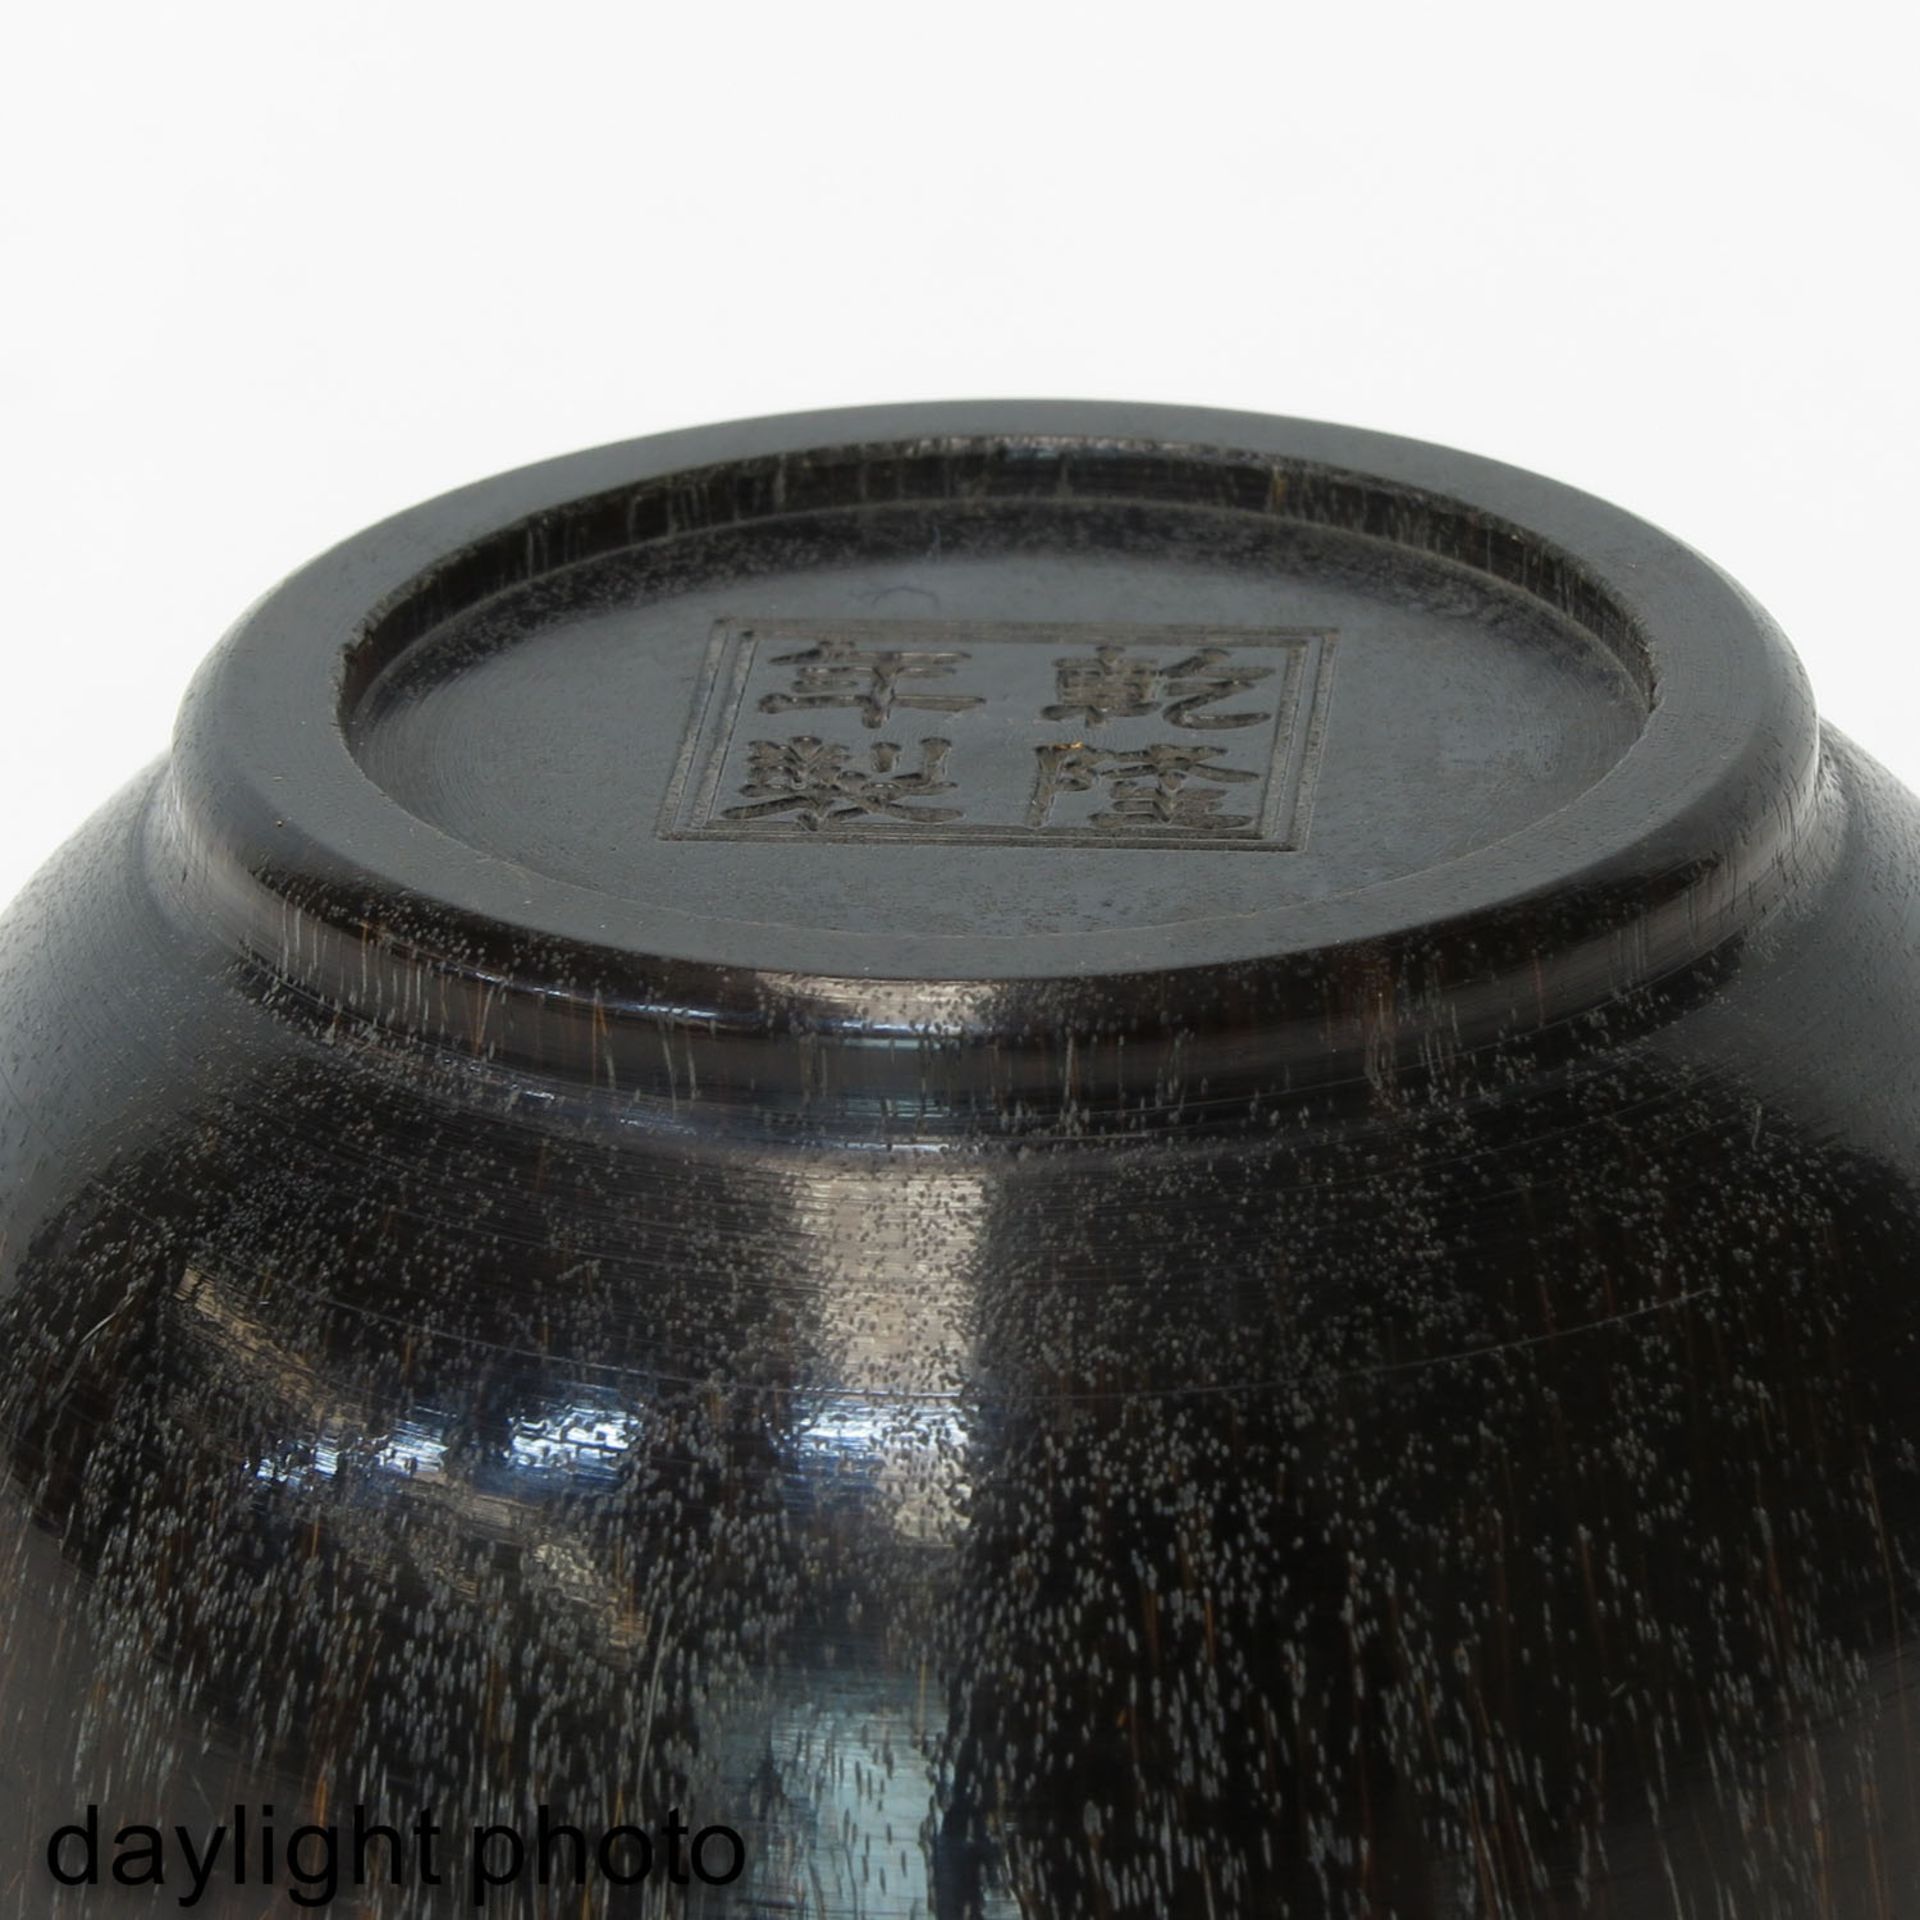 A Chinese Cup - Image 8 of 9